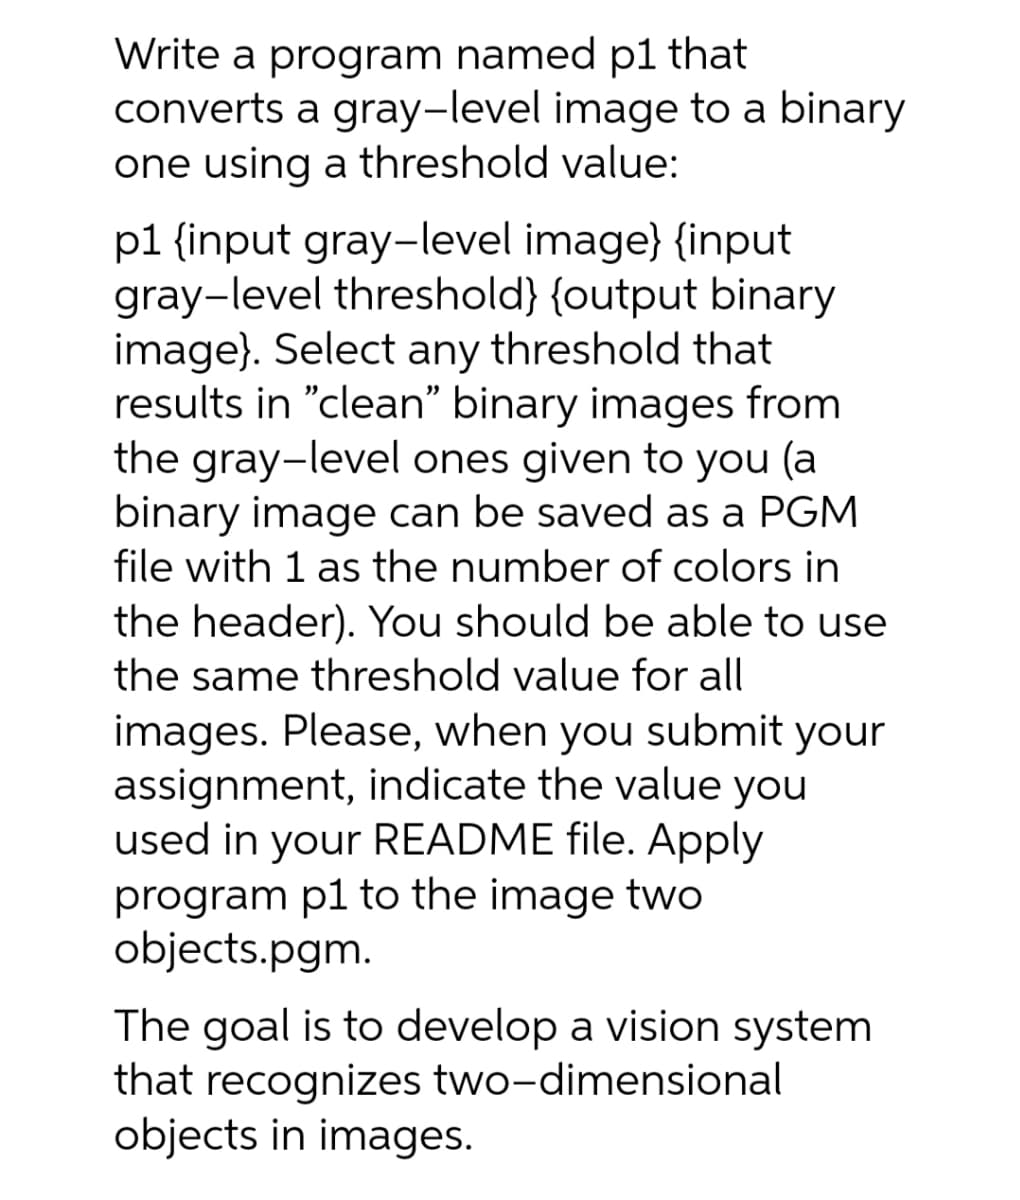 Write a program named p1 that
converts a gray-level image to a binary
one using a threshold value:
p1 {input gray-level image} {input
gray-level threshold} {output binary
image}. Select any threshold that
results in "clean" binary images from
the gray-level ones given to you (a
binary image can be saved as a PGM
file with 1 as the number of colors in
the header). You should be able to use
the same threshold value for all
images. Please, when you submit your
assignment, indicate the value you
used in your README file. Apply
program p1 to the image two
objects.pgm.
The goal is to develop a vision system
that recognizes two-dimensional
objects in images.
